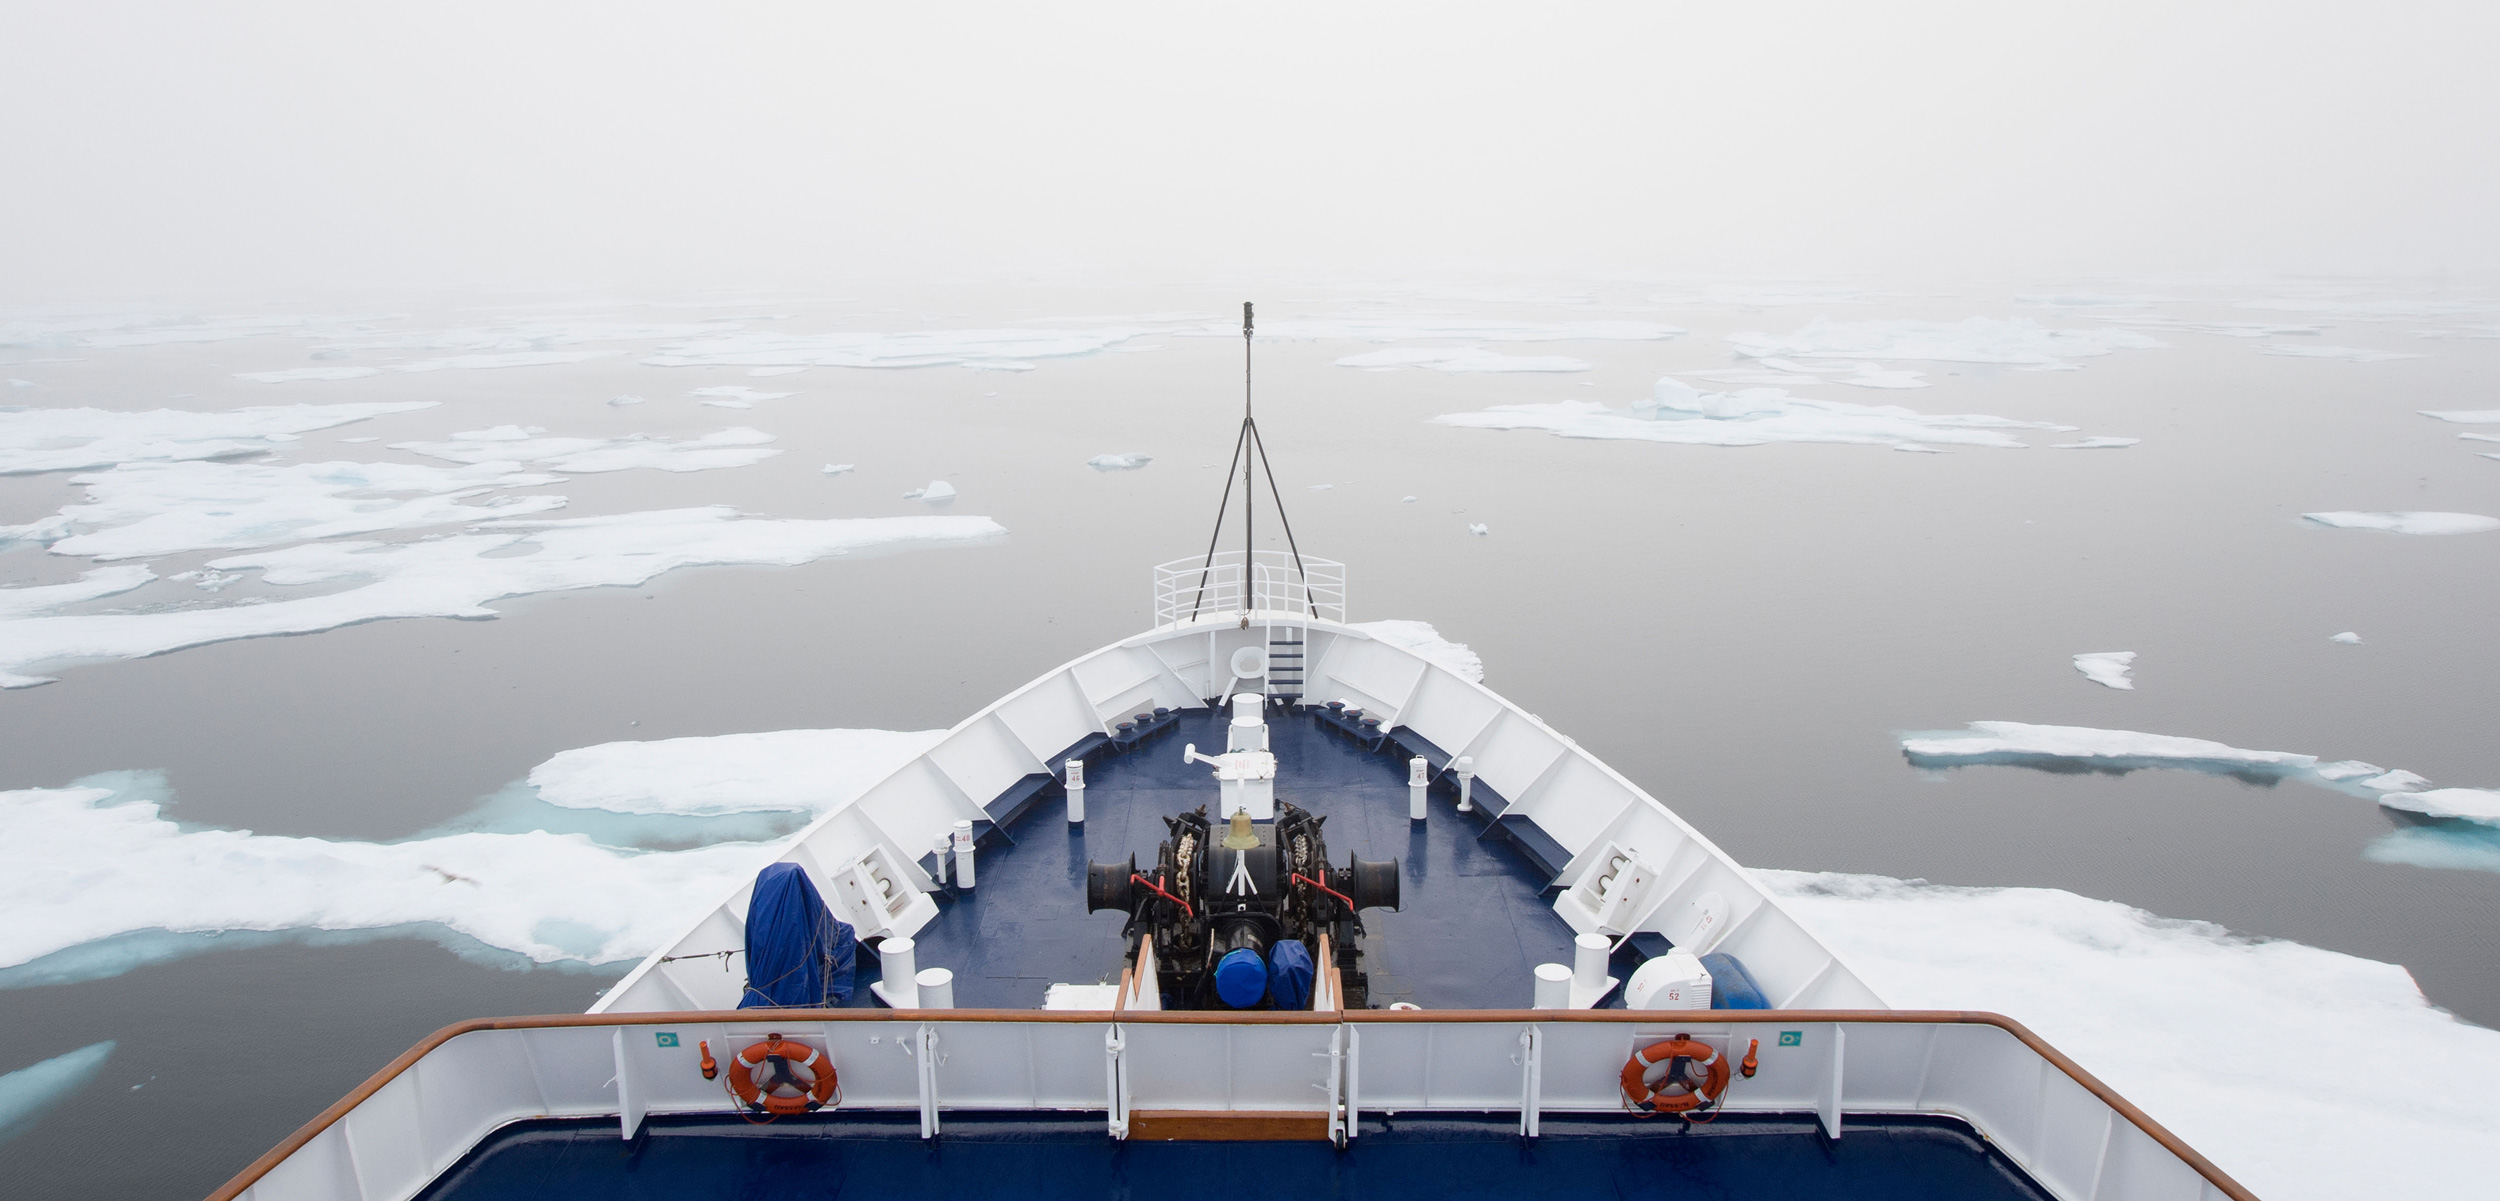 After analyzing maps of shipping activity and sea ice, researchers suggest it is the presence of thick, multi-year ice that limits the rise of Arctic shipping in a particular area. Photo by Mint Images Limited/Alamy Stock Photo